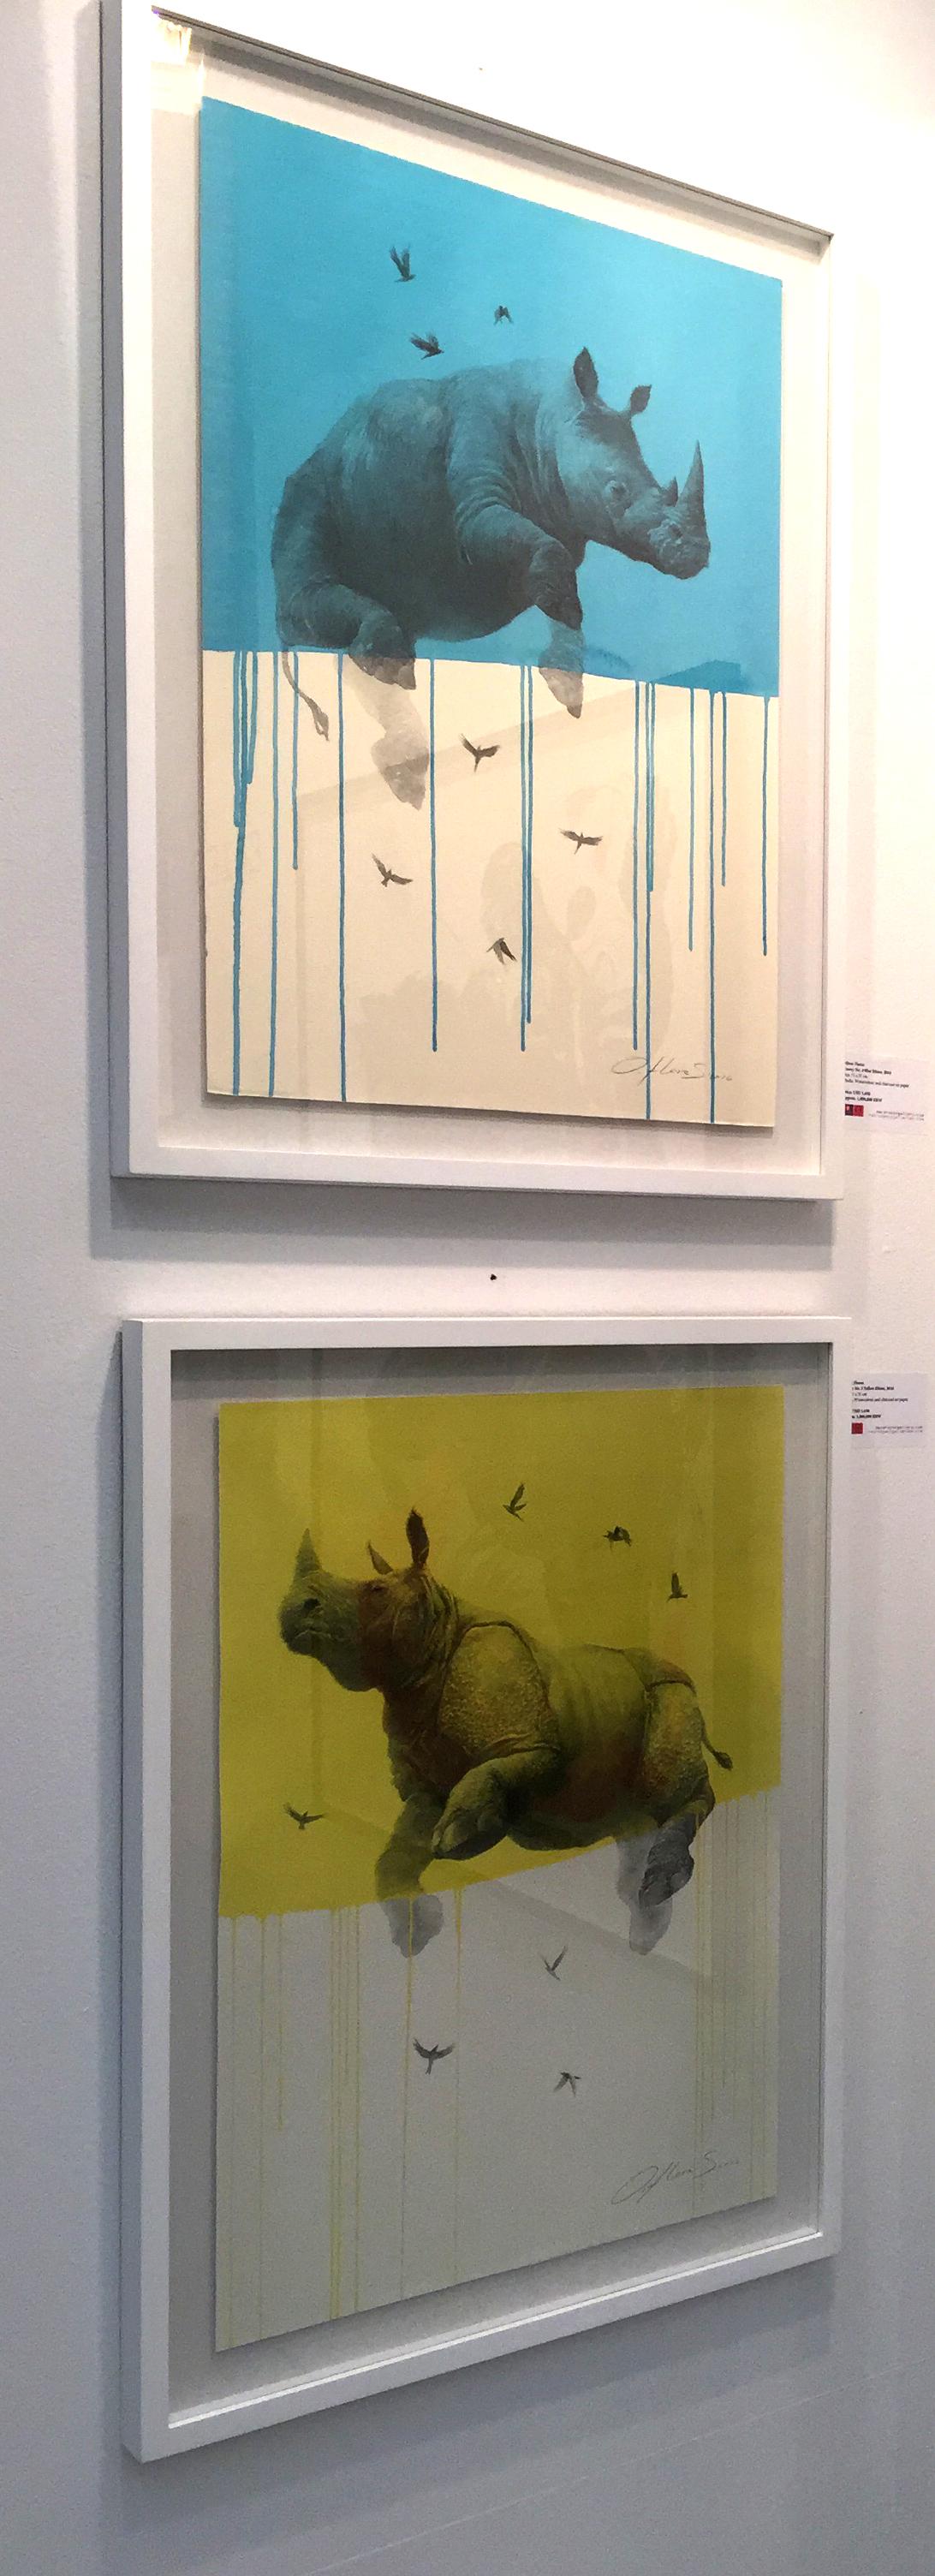 Jouney No. 5 Yellow Rhino, watercolor & charcoal of flying rhinoceros and birds - Art by Oliver Flores